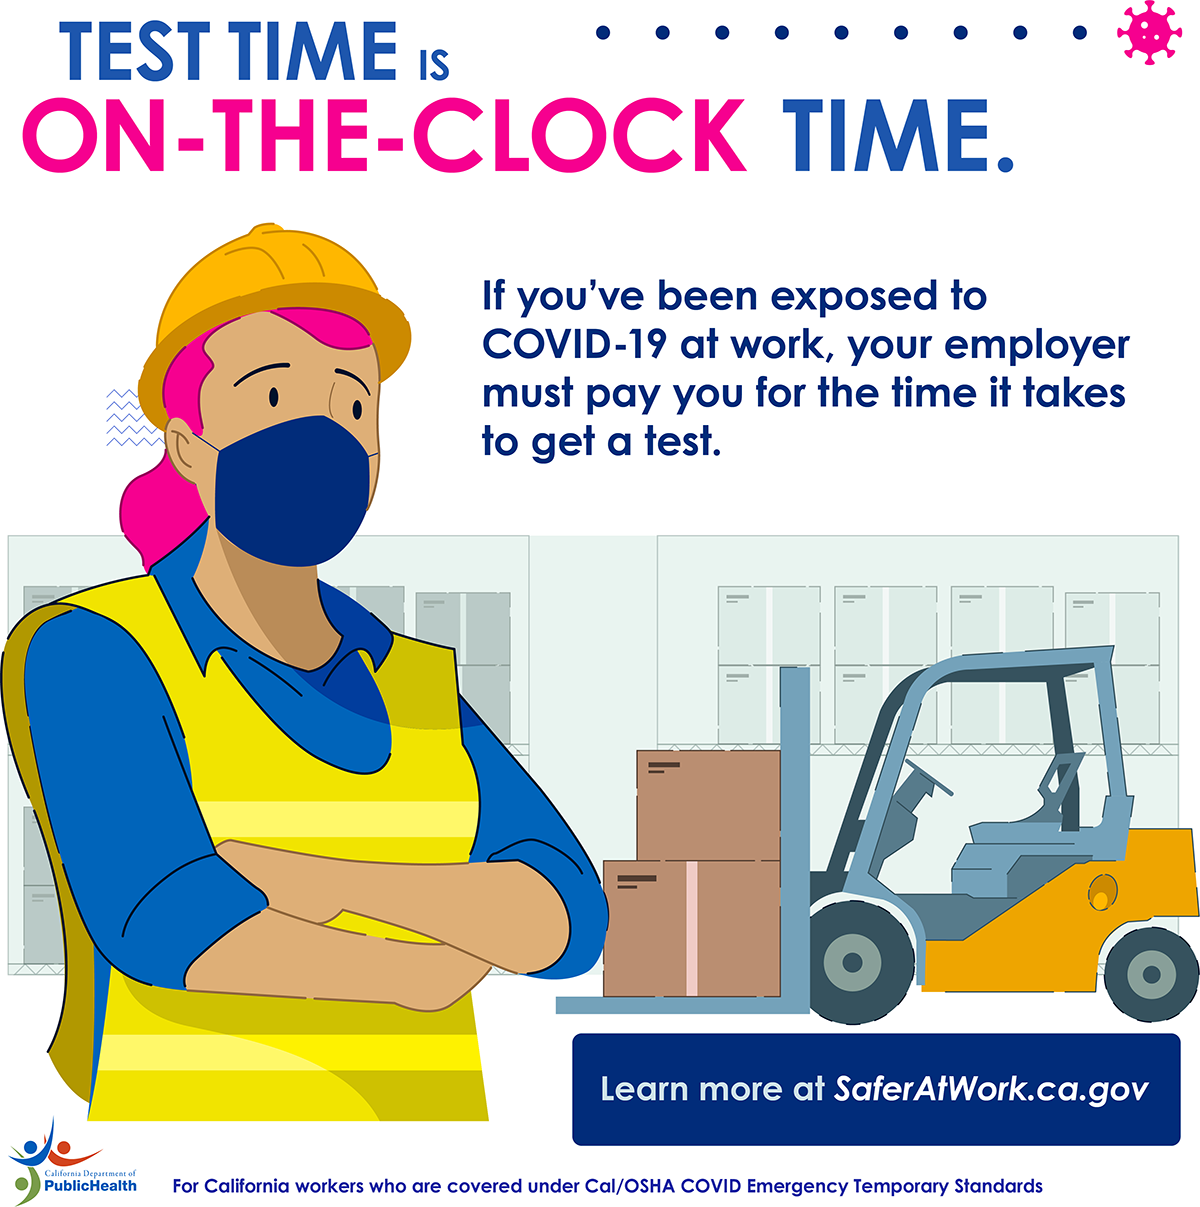 Test time is on-the-clock time. If you've been exposed to COVID-19 at work, your employer must pay you for the time it takes to get a test.